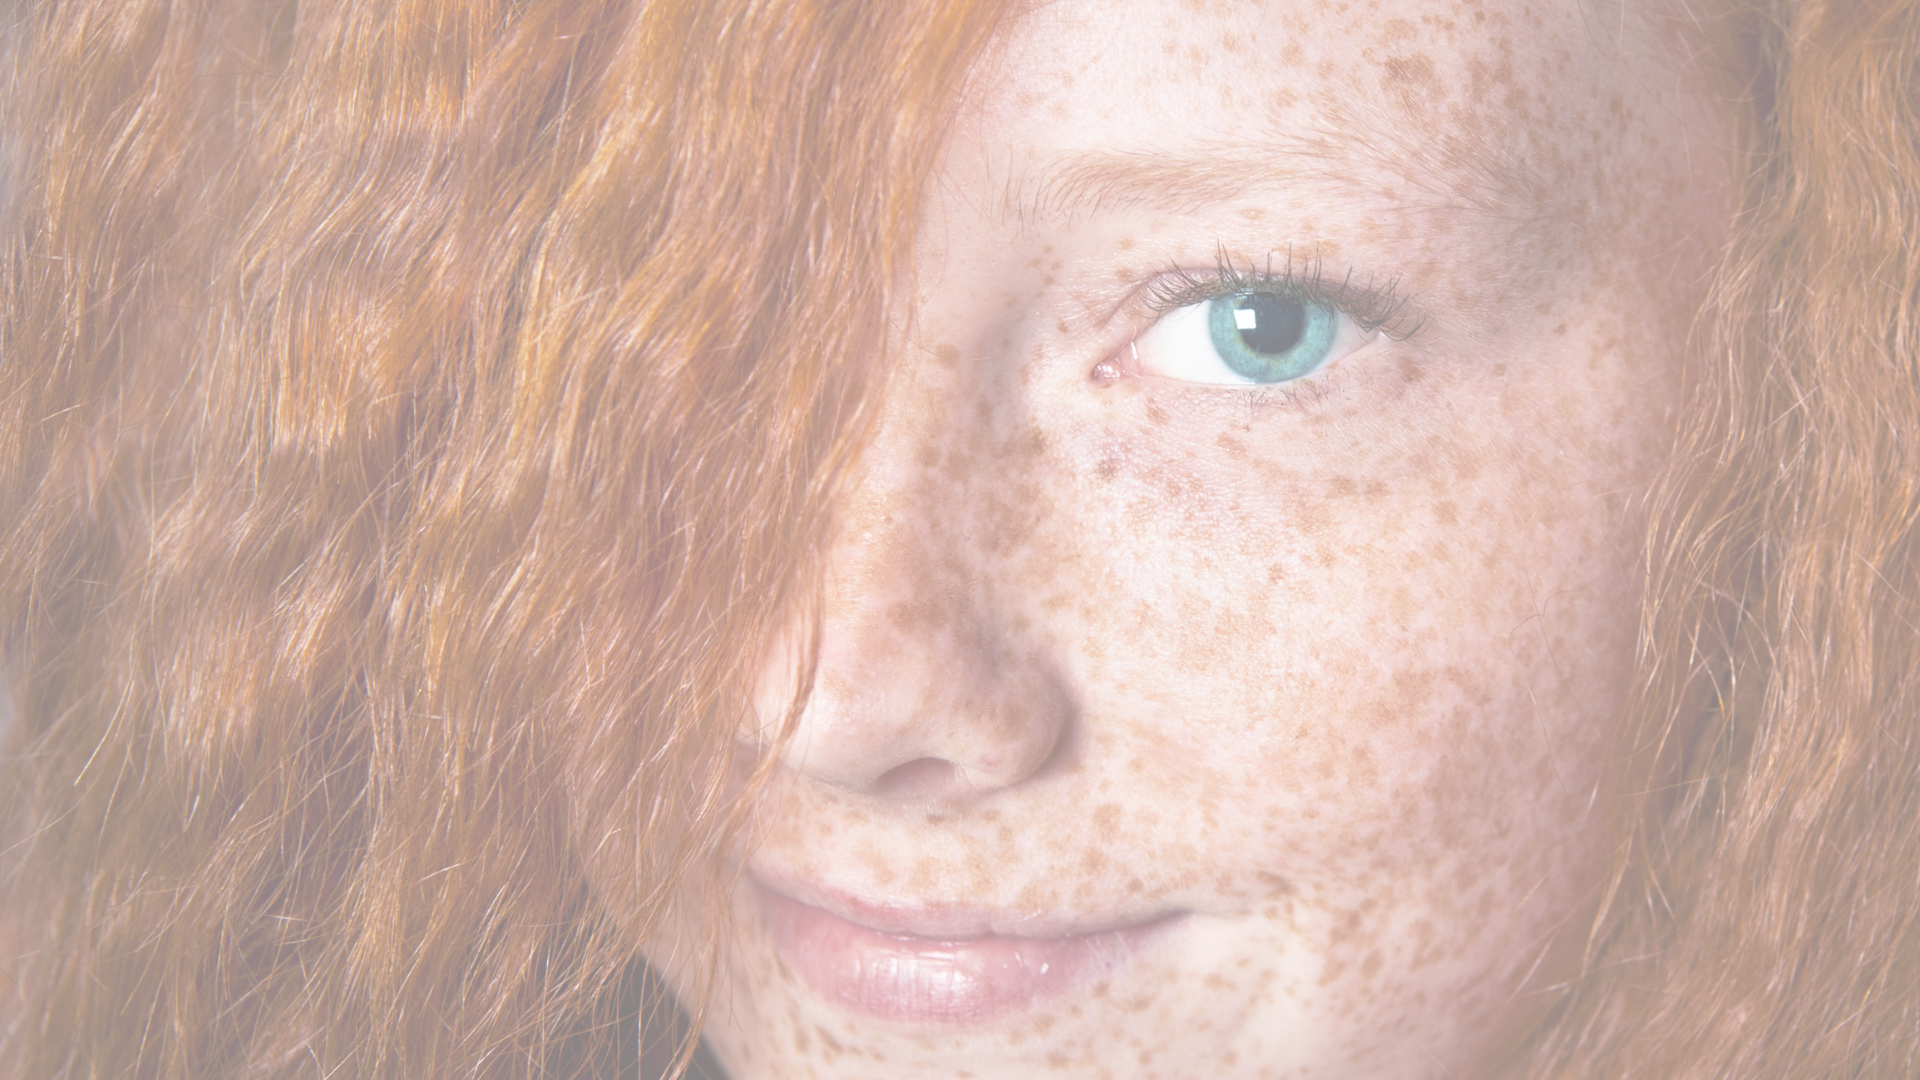 How Redheads Can Apply Foundation Without Covering Freckles